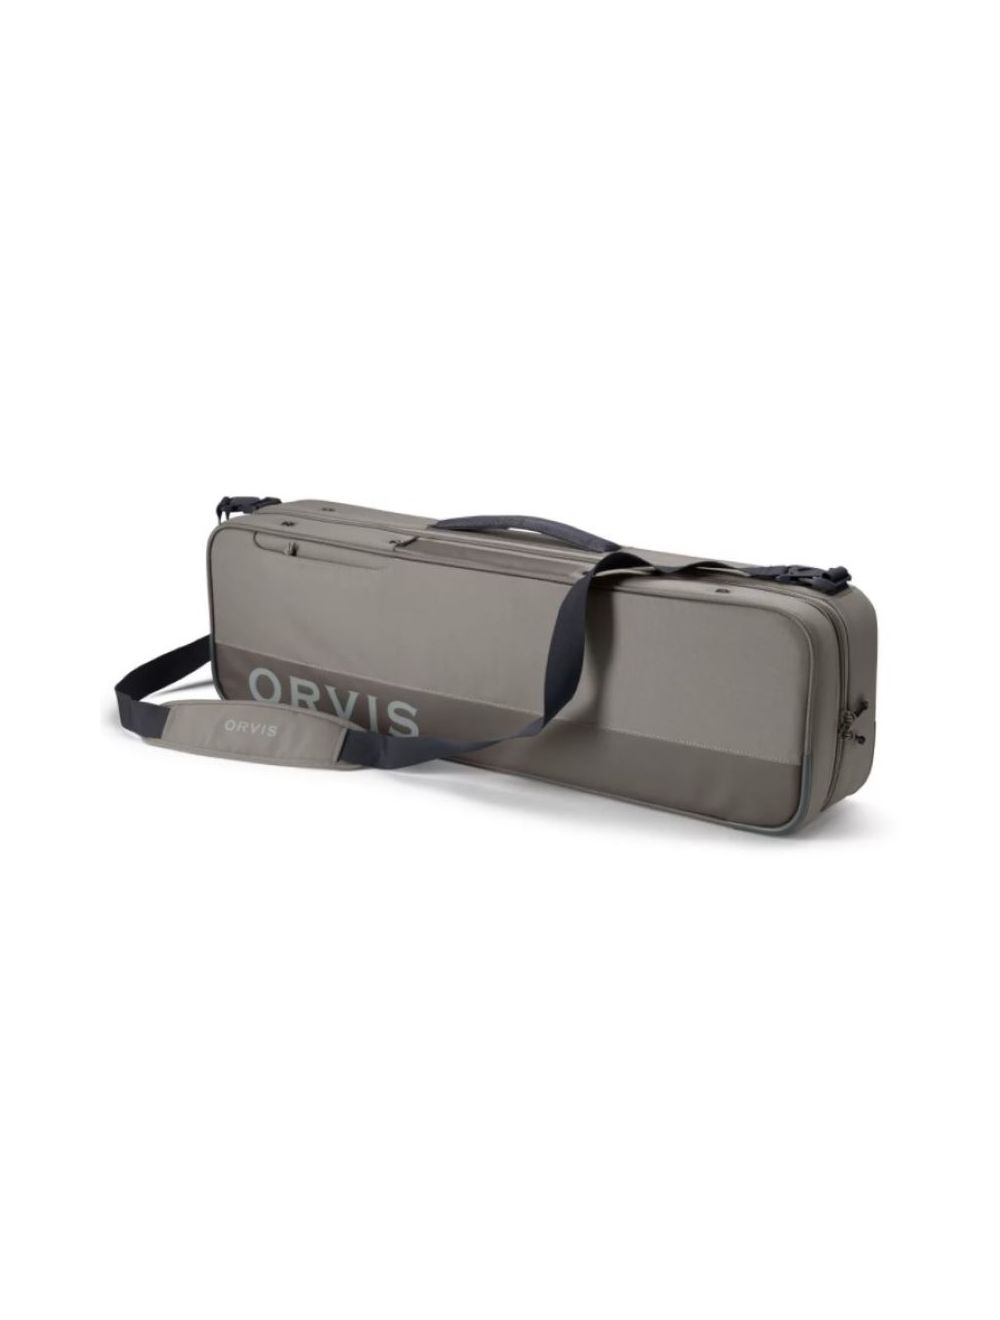 Orvis Carry It All Flyfishing Luggage TheFlyStop